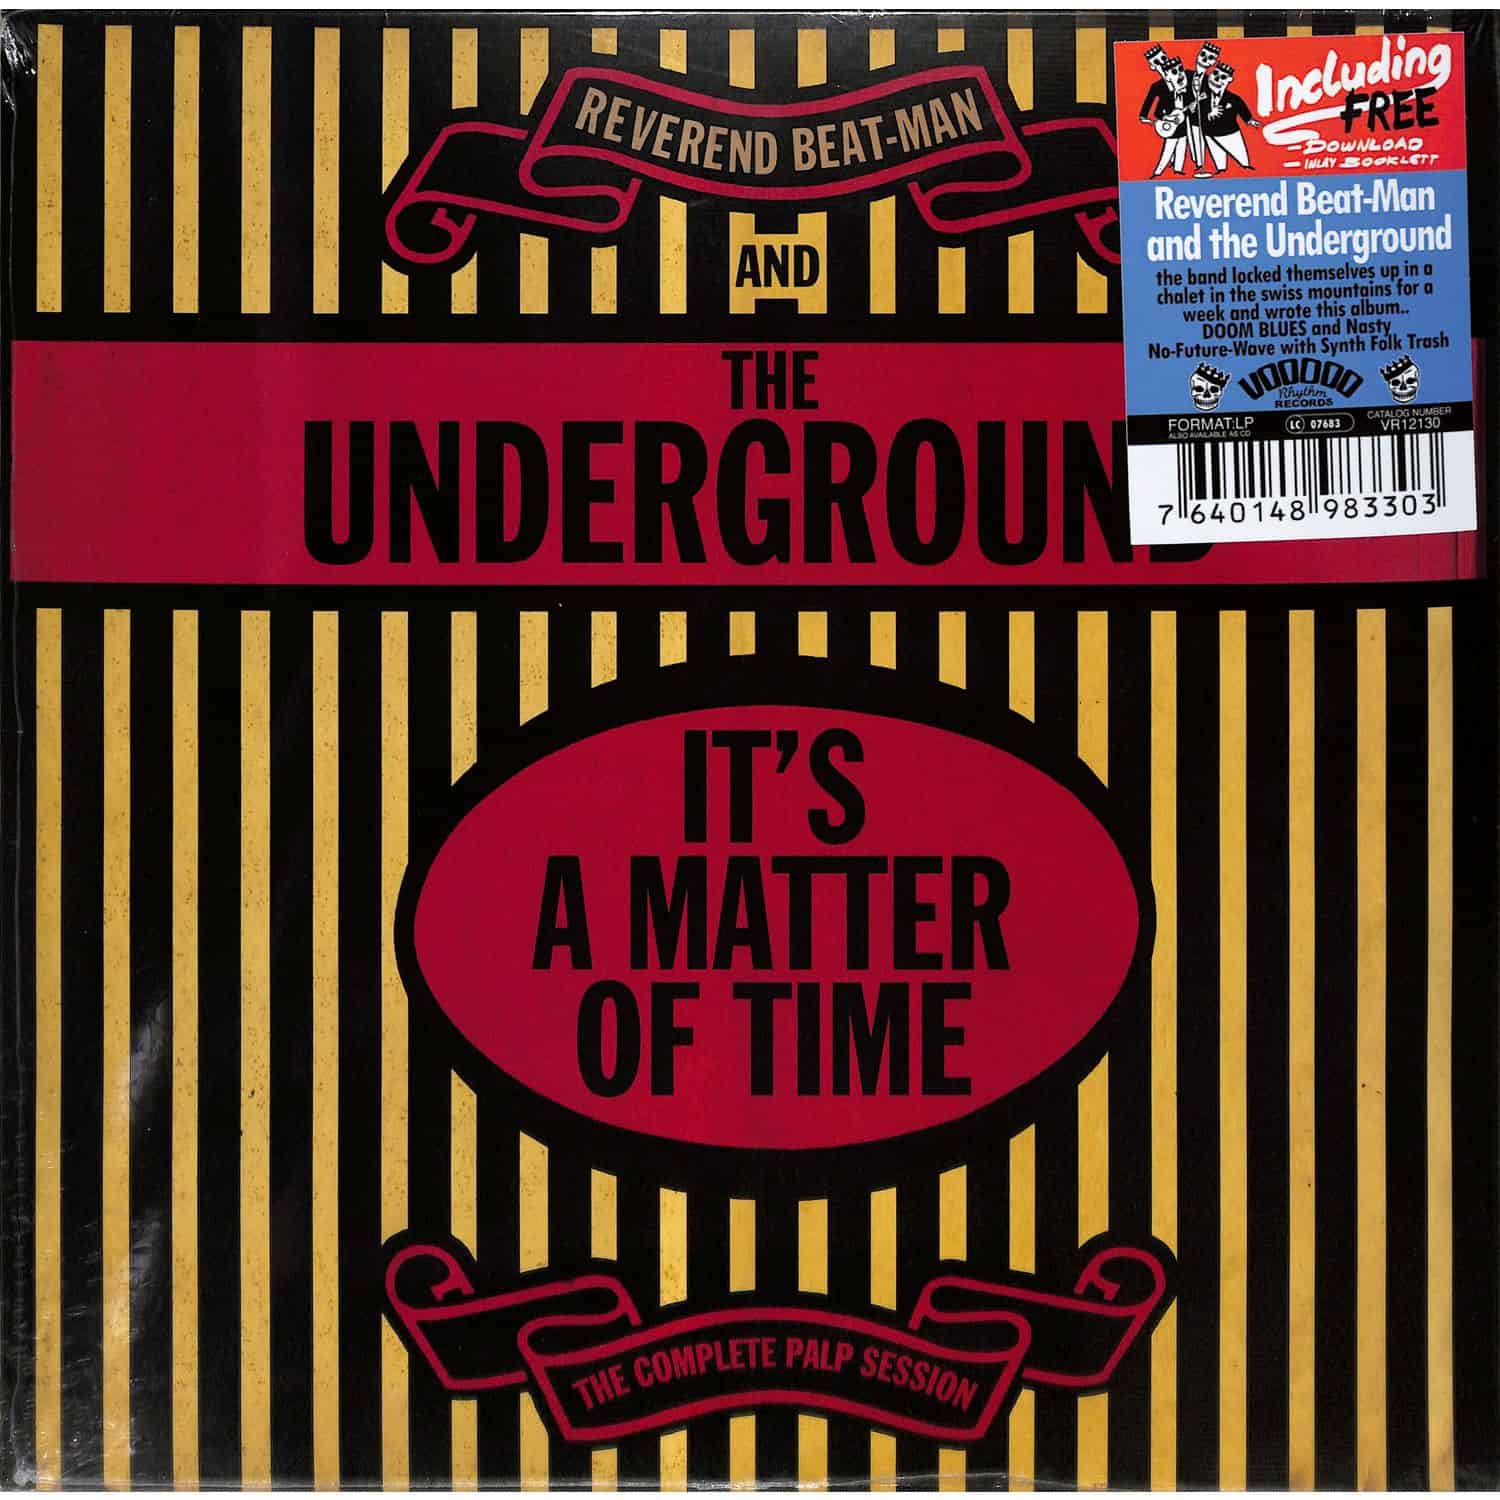 Reverend Beat-Man & The Underground - ITS A MATTER OF TIME - THE COMPLETE PALP SESSION 